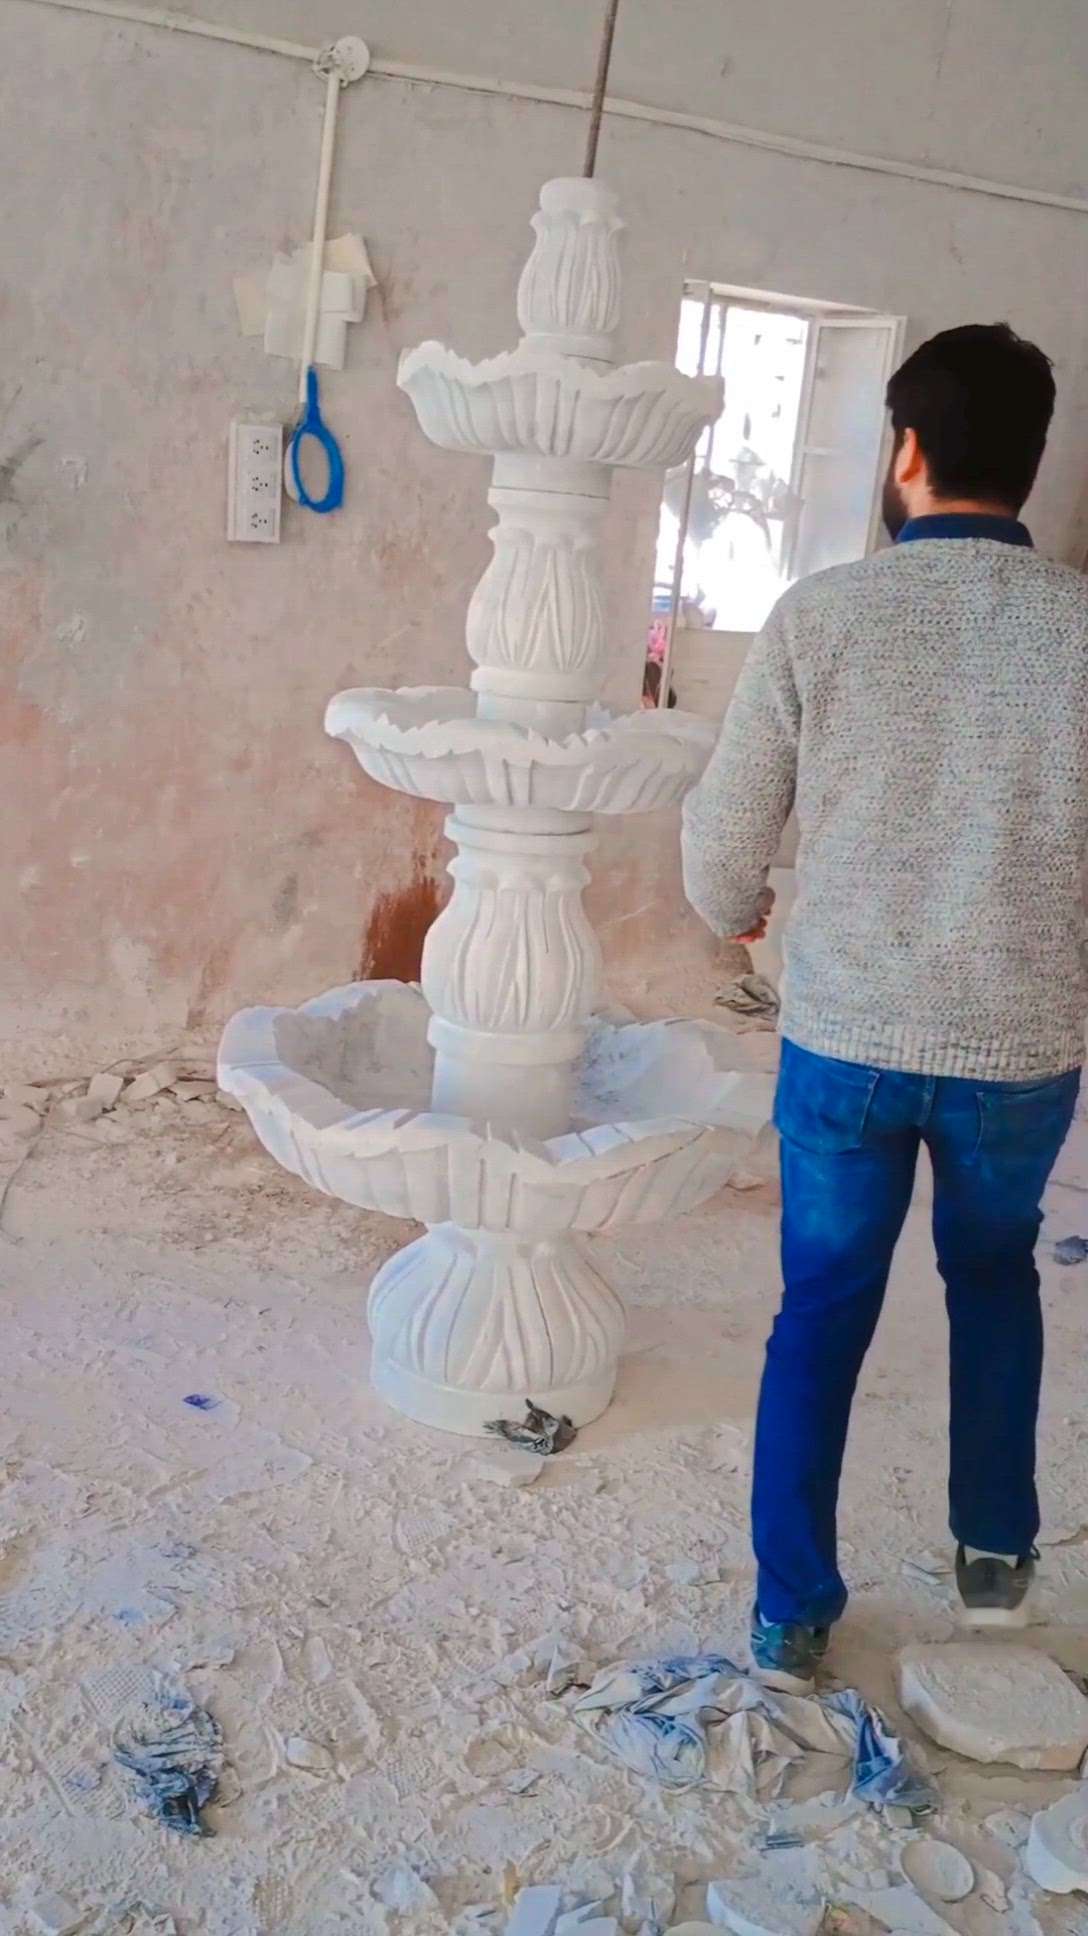 Kumari Marble Fountain

Decor your garden with beautiful fountain

We are manufacturer of marble and sandstone fountain

We make any design according to your requirement and size

Follow me @nbmarble

More information contact me
082330 78099 

#fountain #nbmarble #gardenfountain #homedecor #waterfountain #waterfalls #MarbleFountain #whitemarble